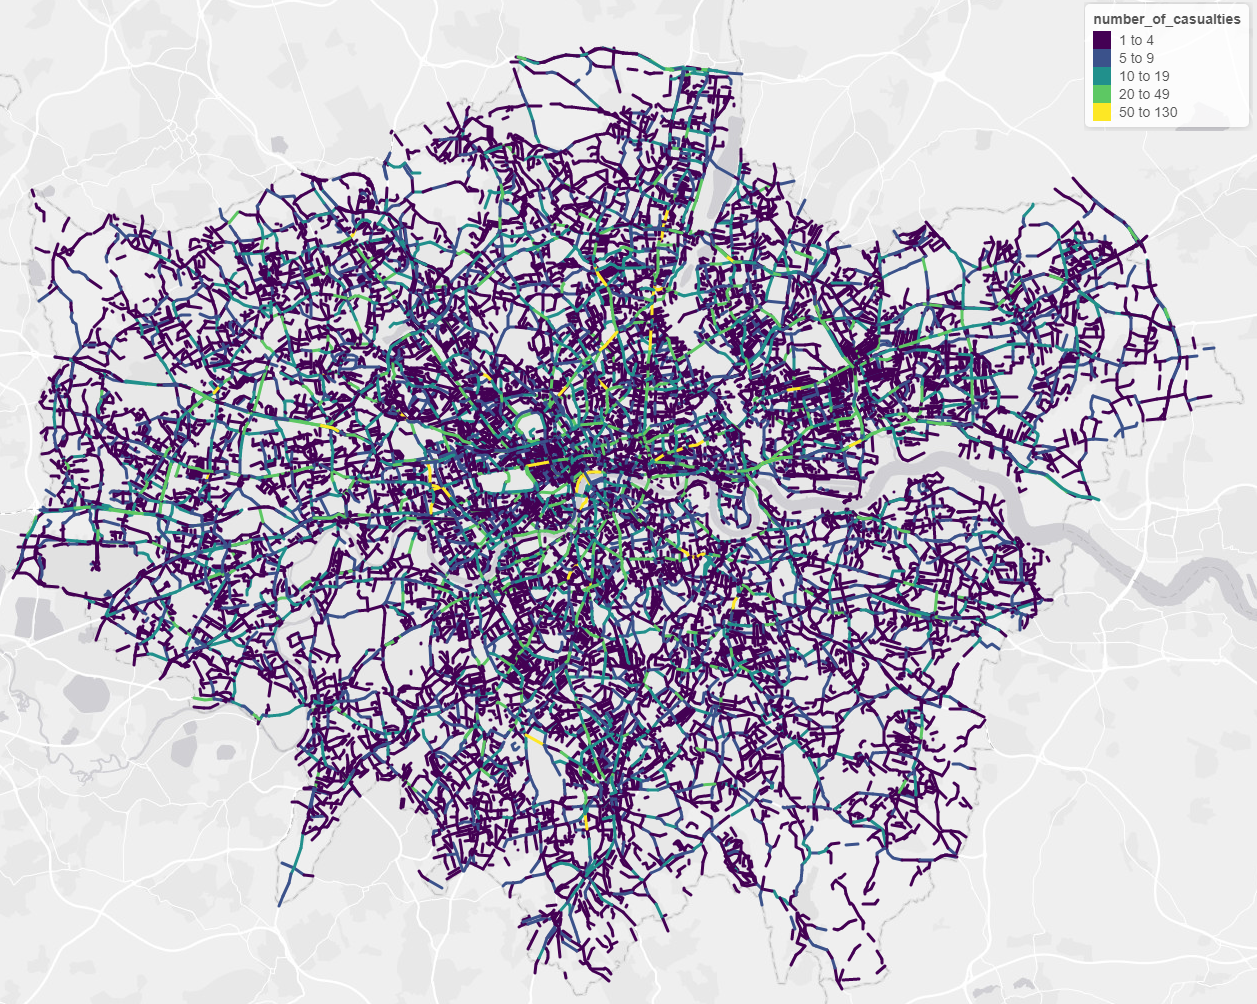 Preliminary maps of London roads showing number of casualties over the last 10 years from crashed not at junctions